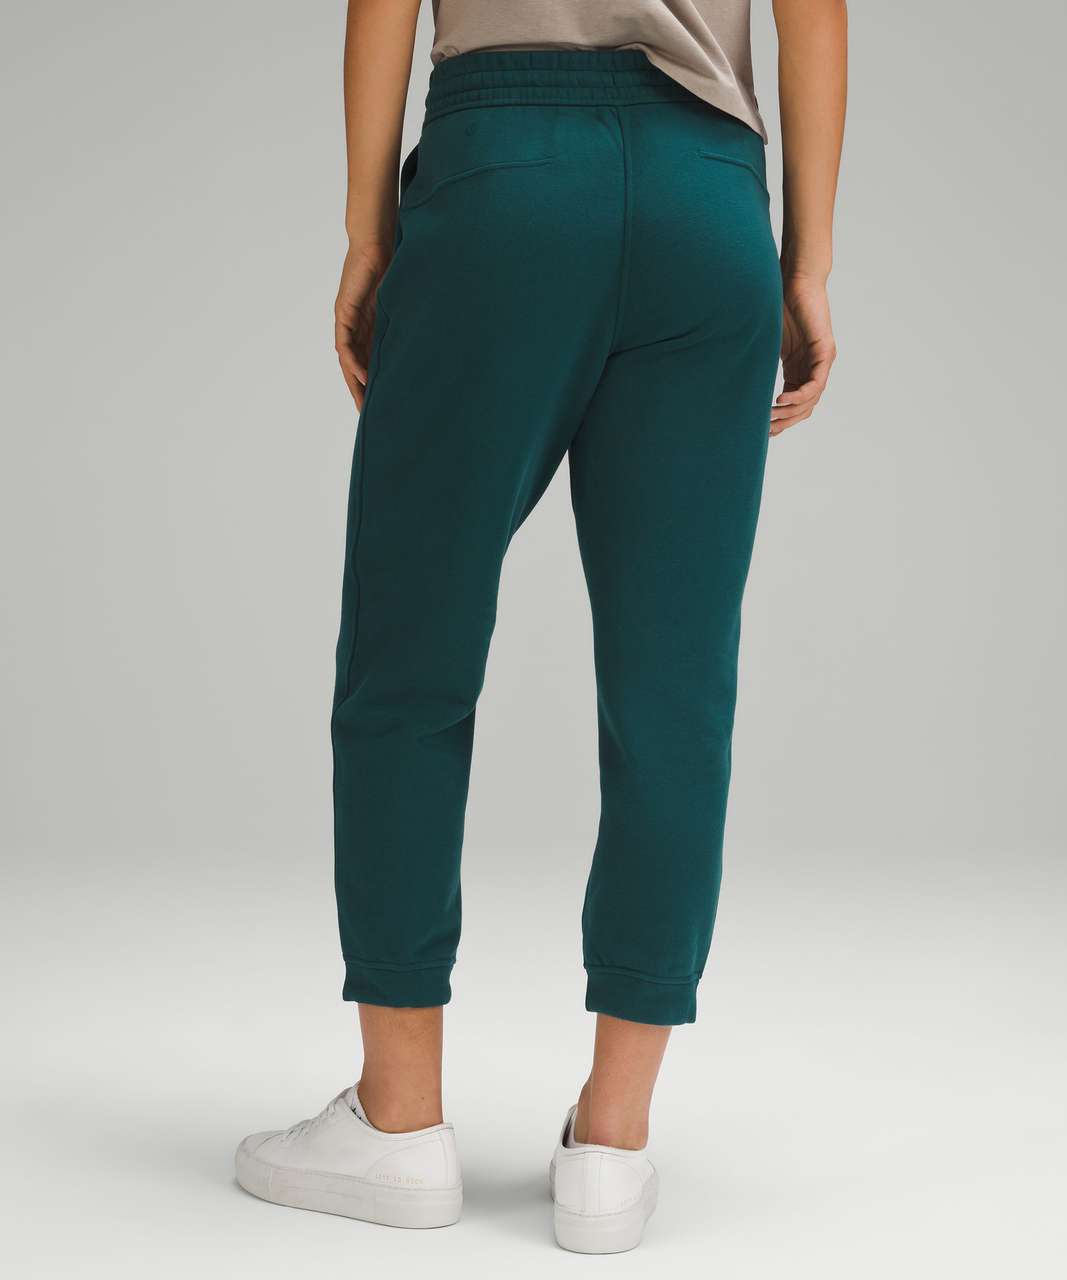 lululemon POCC *softstreme* (Tidewater Teal)  Business casual outfits,  Casual outfits, Clothes design